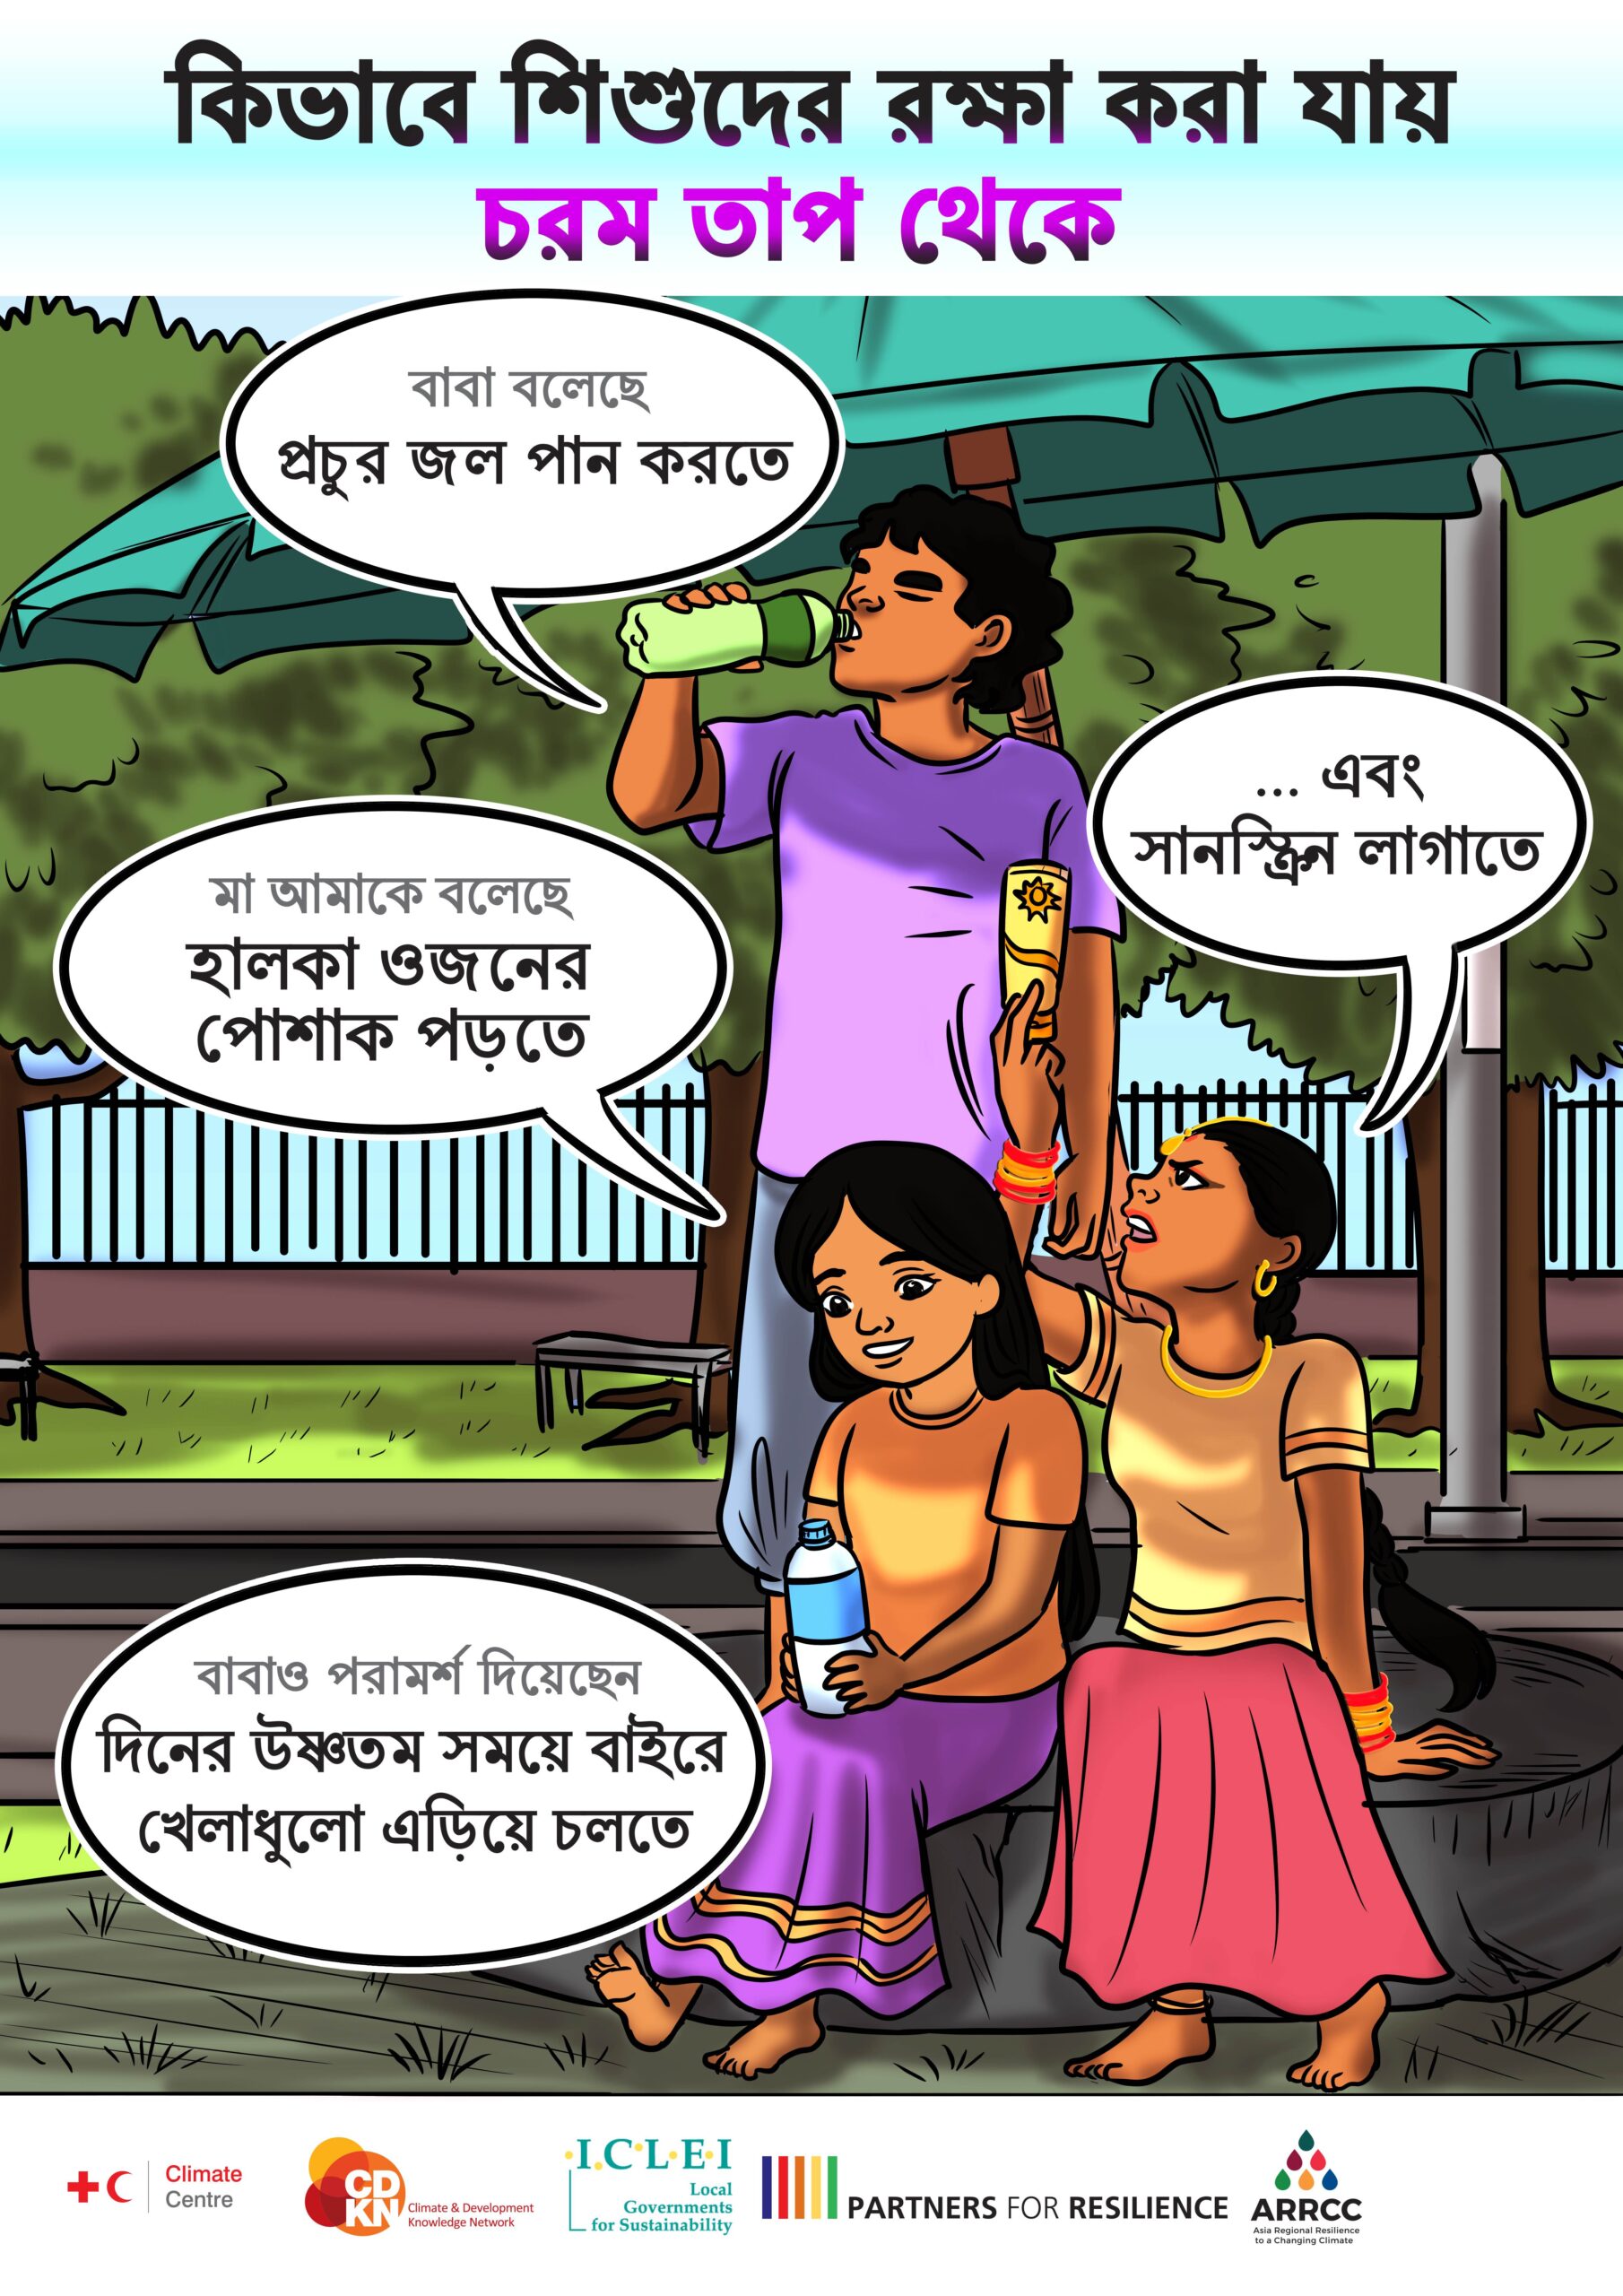 https://ghhin.org/resources/heat-action-campaign-in-bengali/